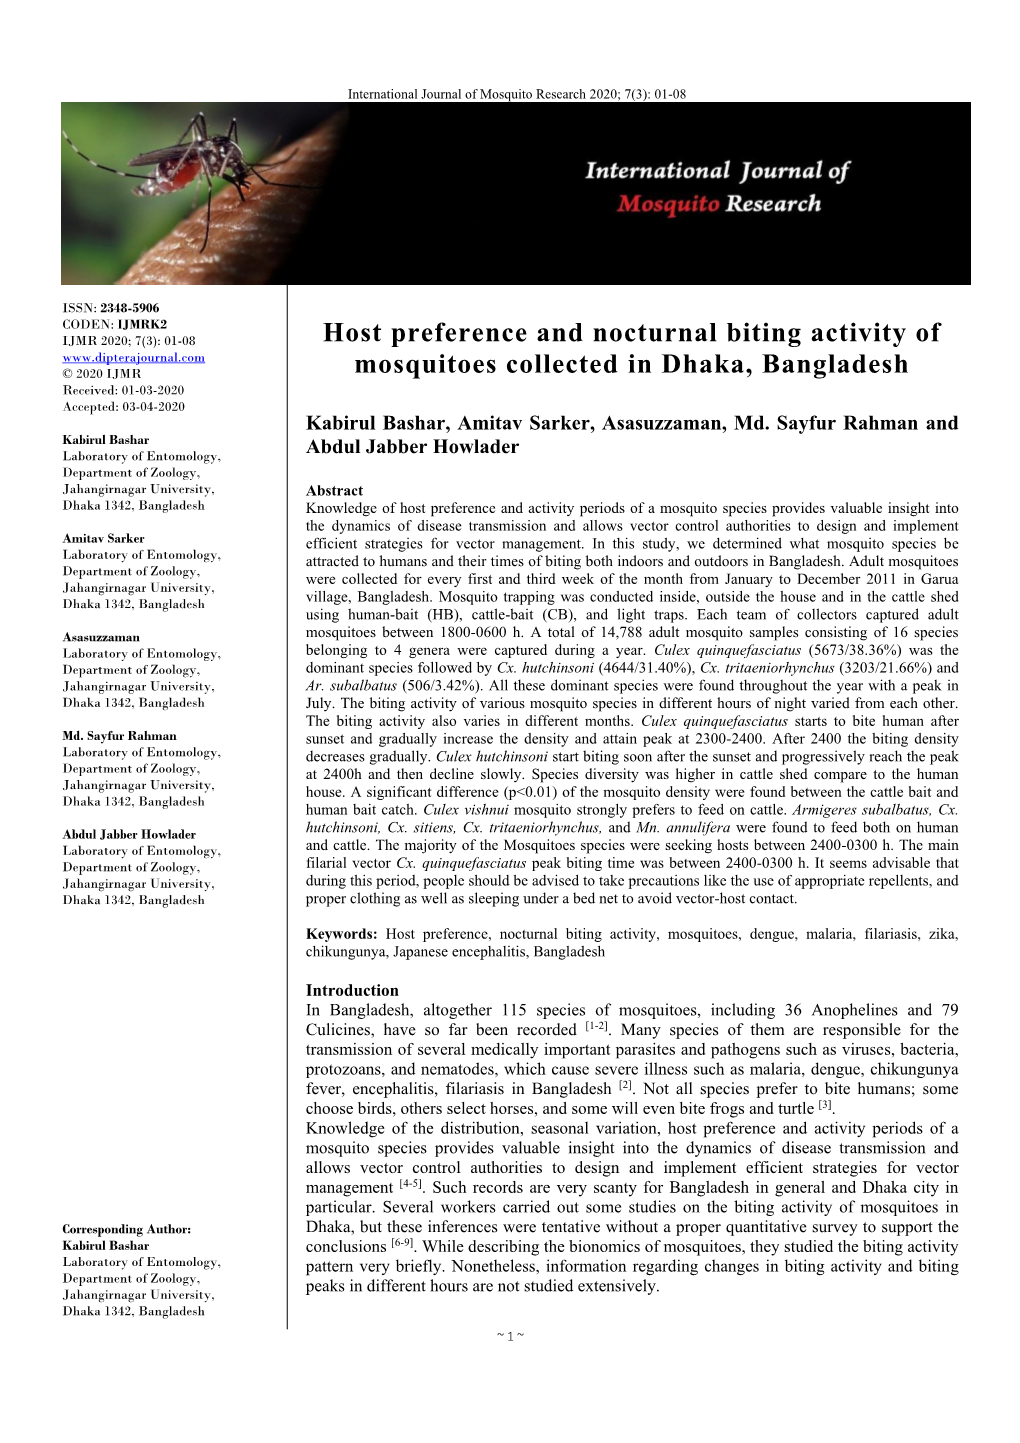 Host Preference and Nocturnal Biting Activity of Mosquitoes Collected In